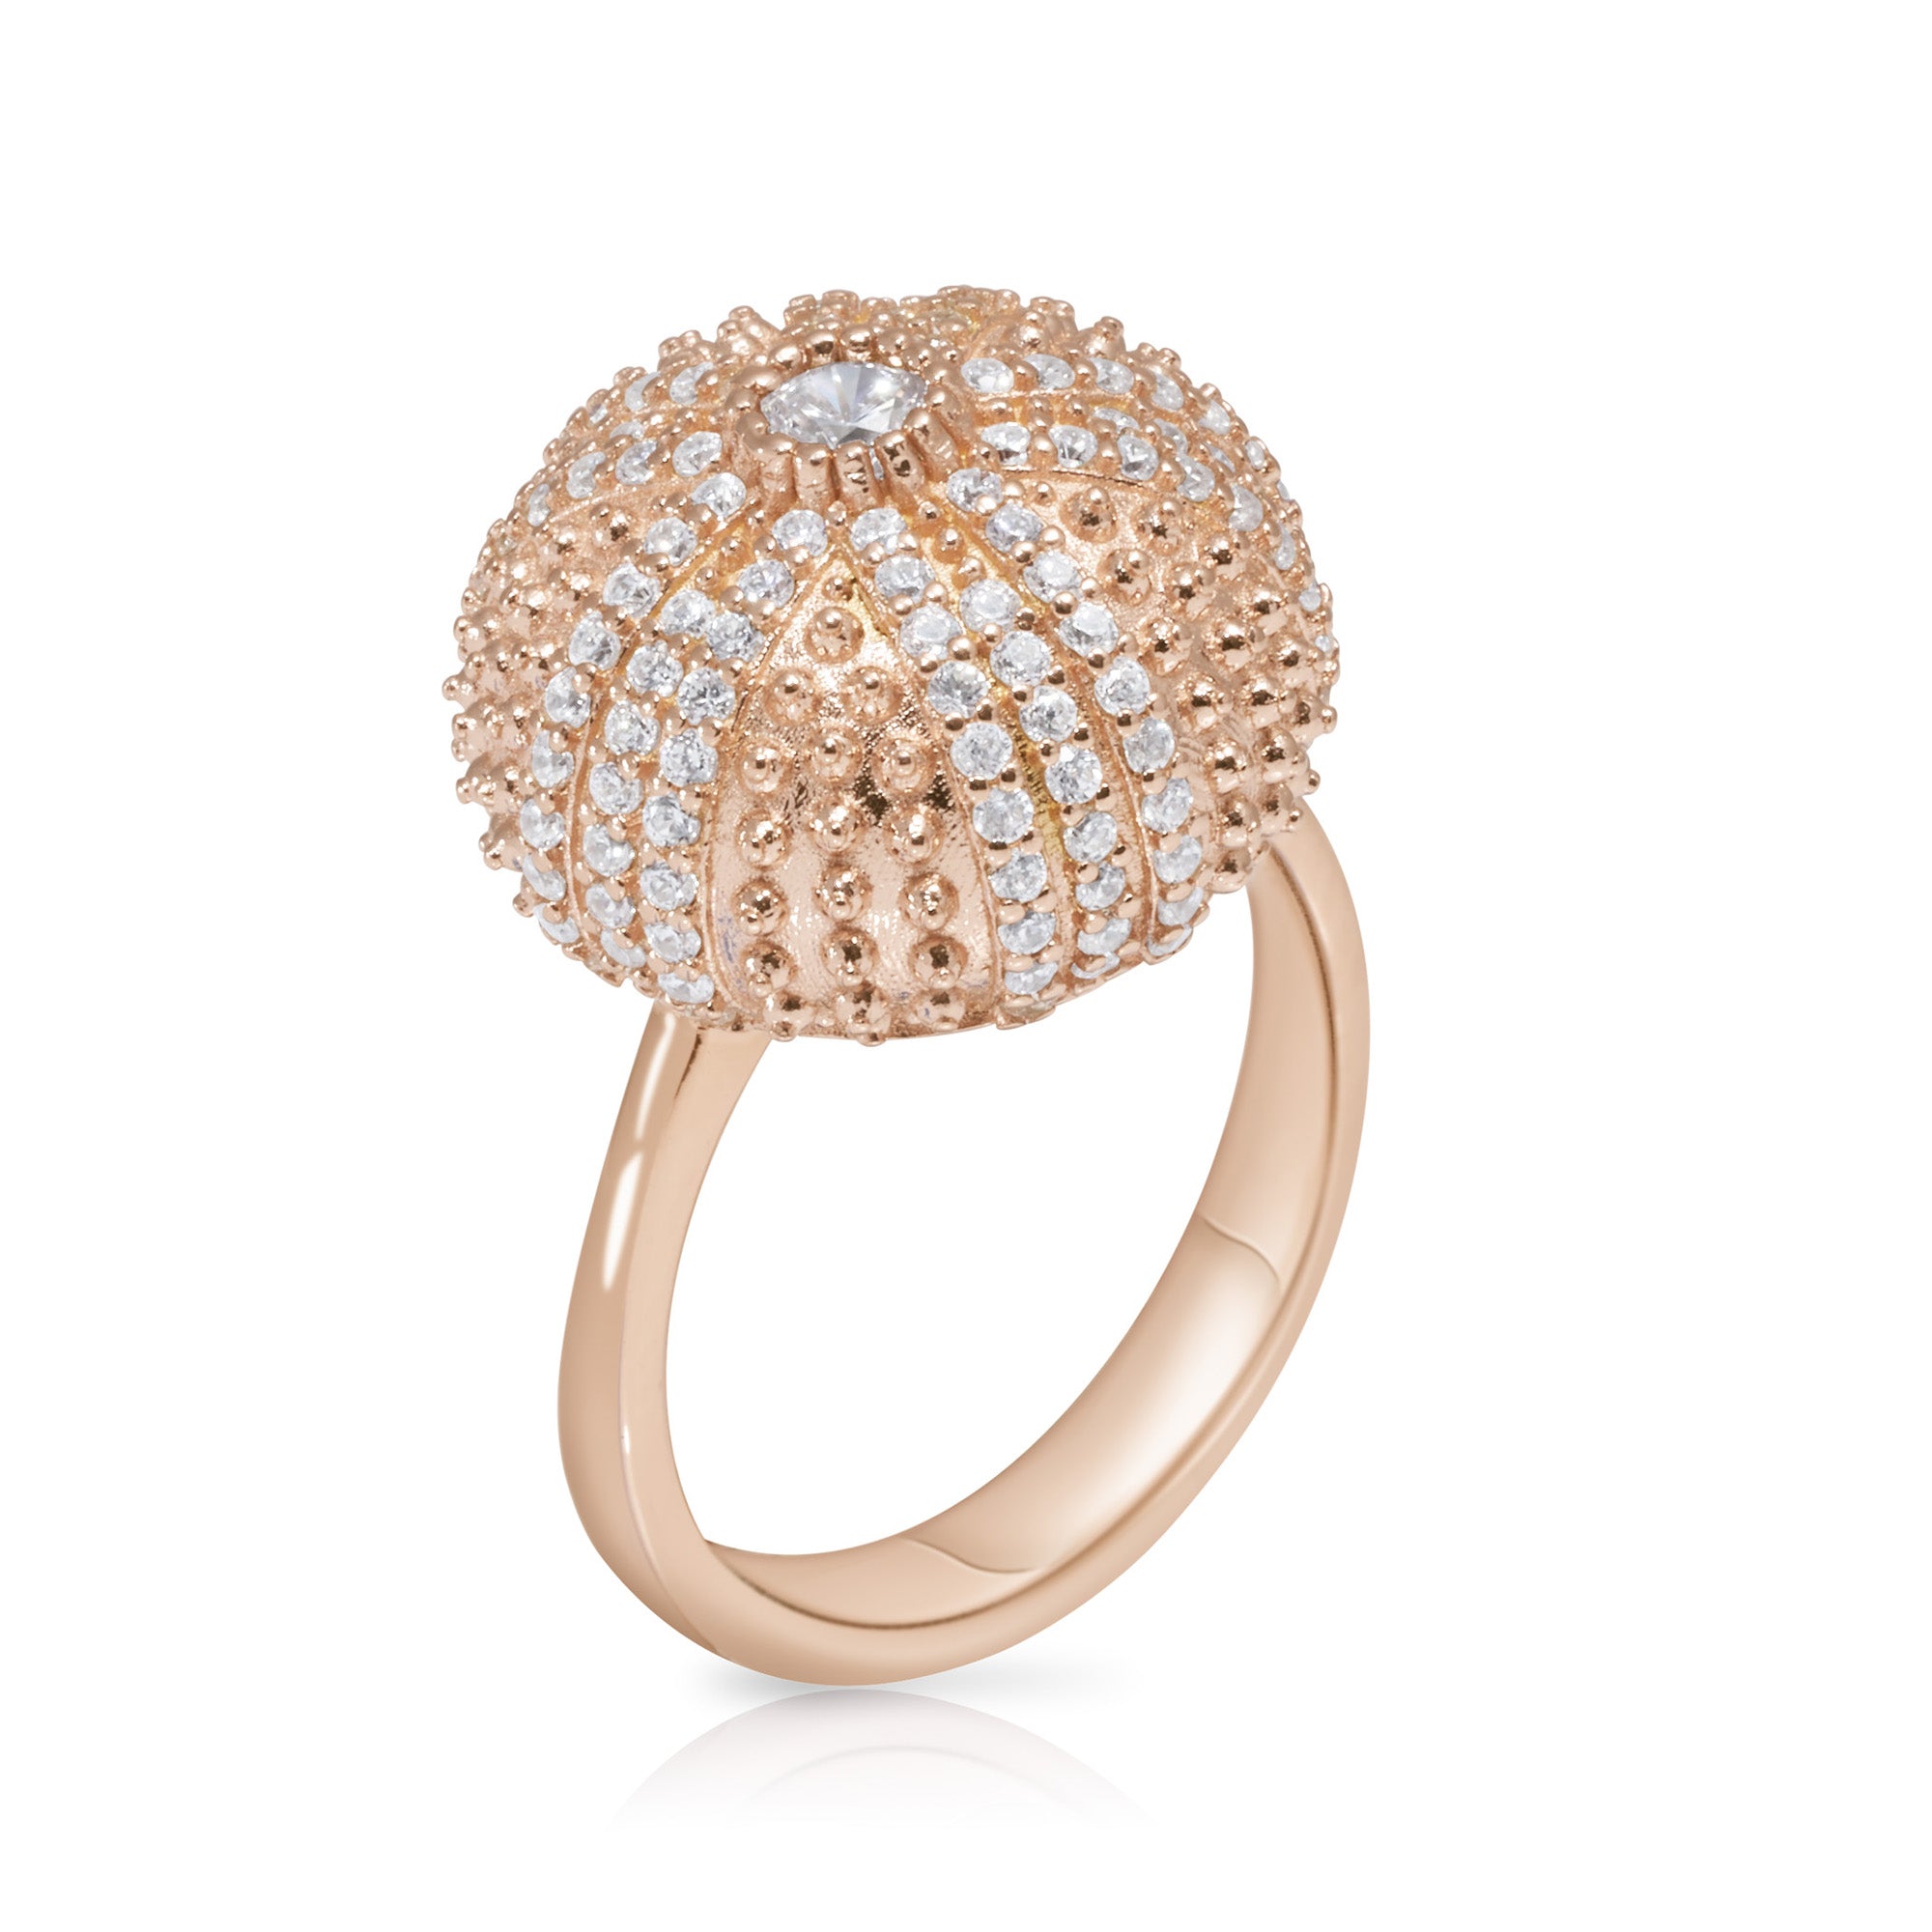 Pink Sea Urchin Cocktail Ring